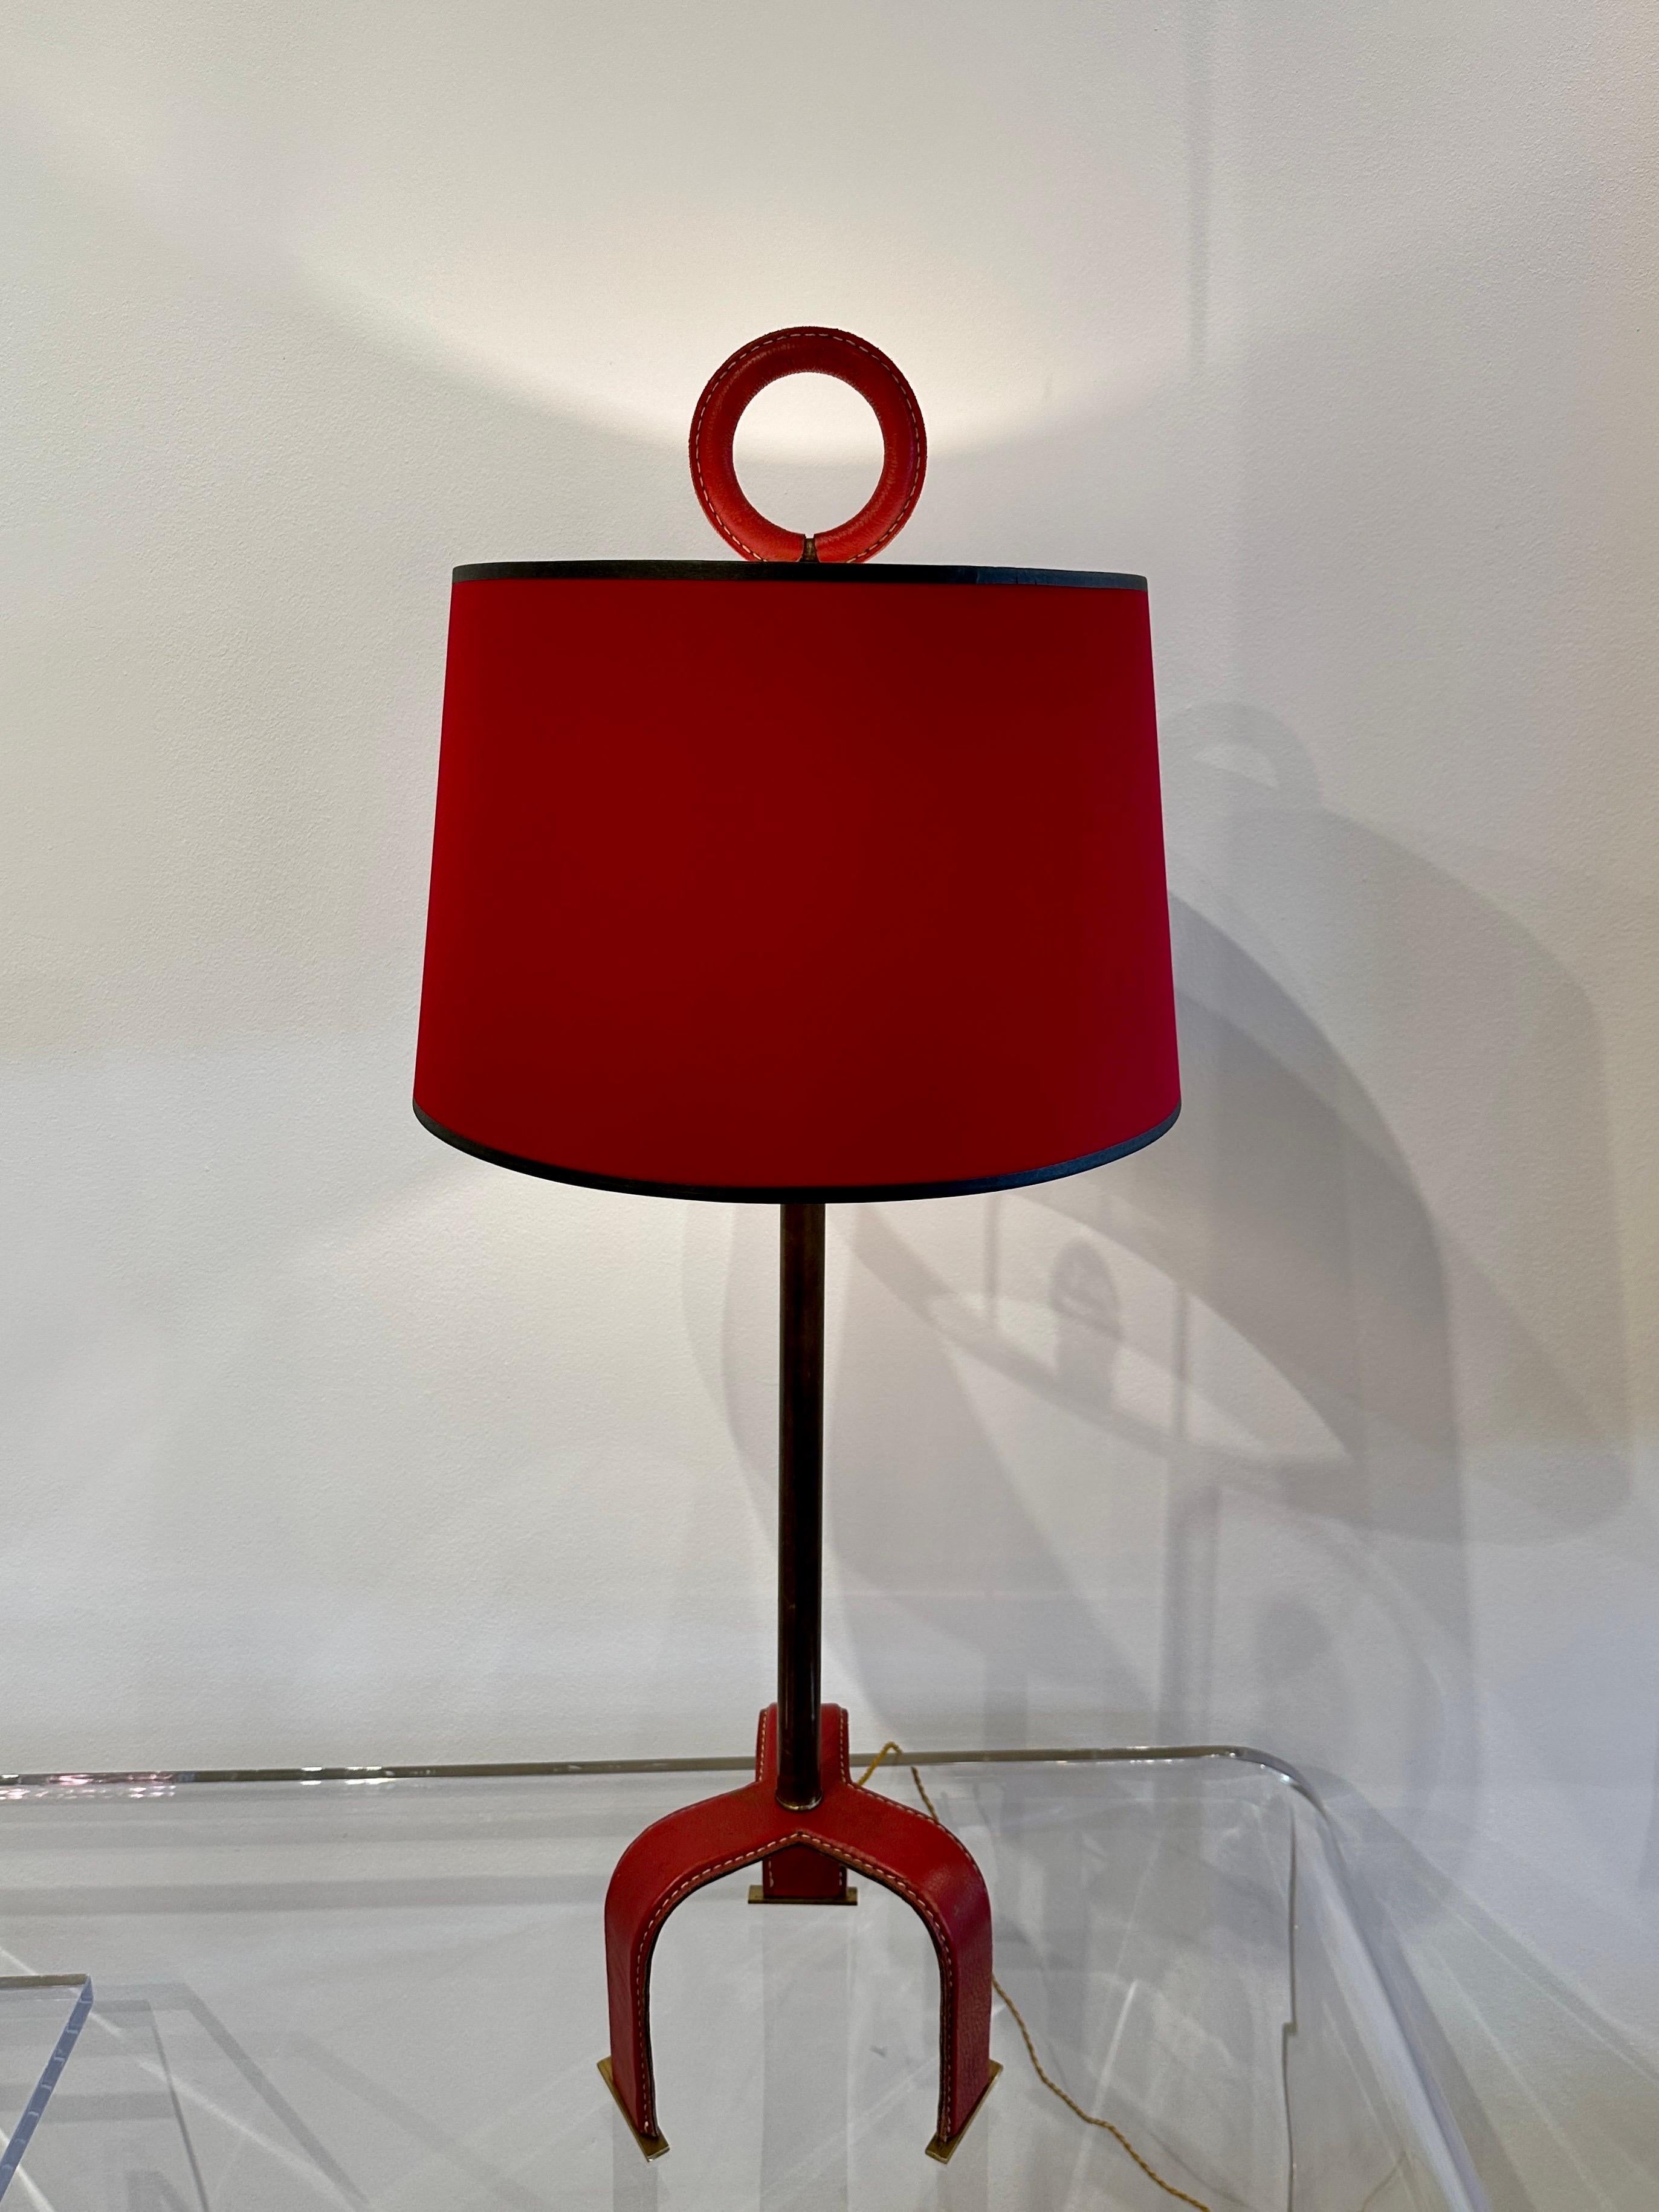 Distinctive Vintage Jacques Adnet style Red Stitched Leather Tall Table Lamp In Good Condition For Sale In East Hampton, NY